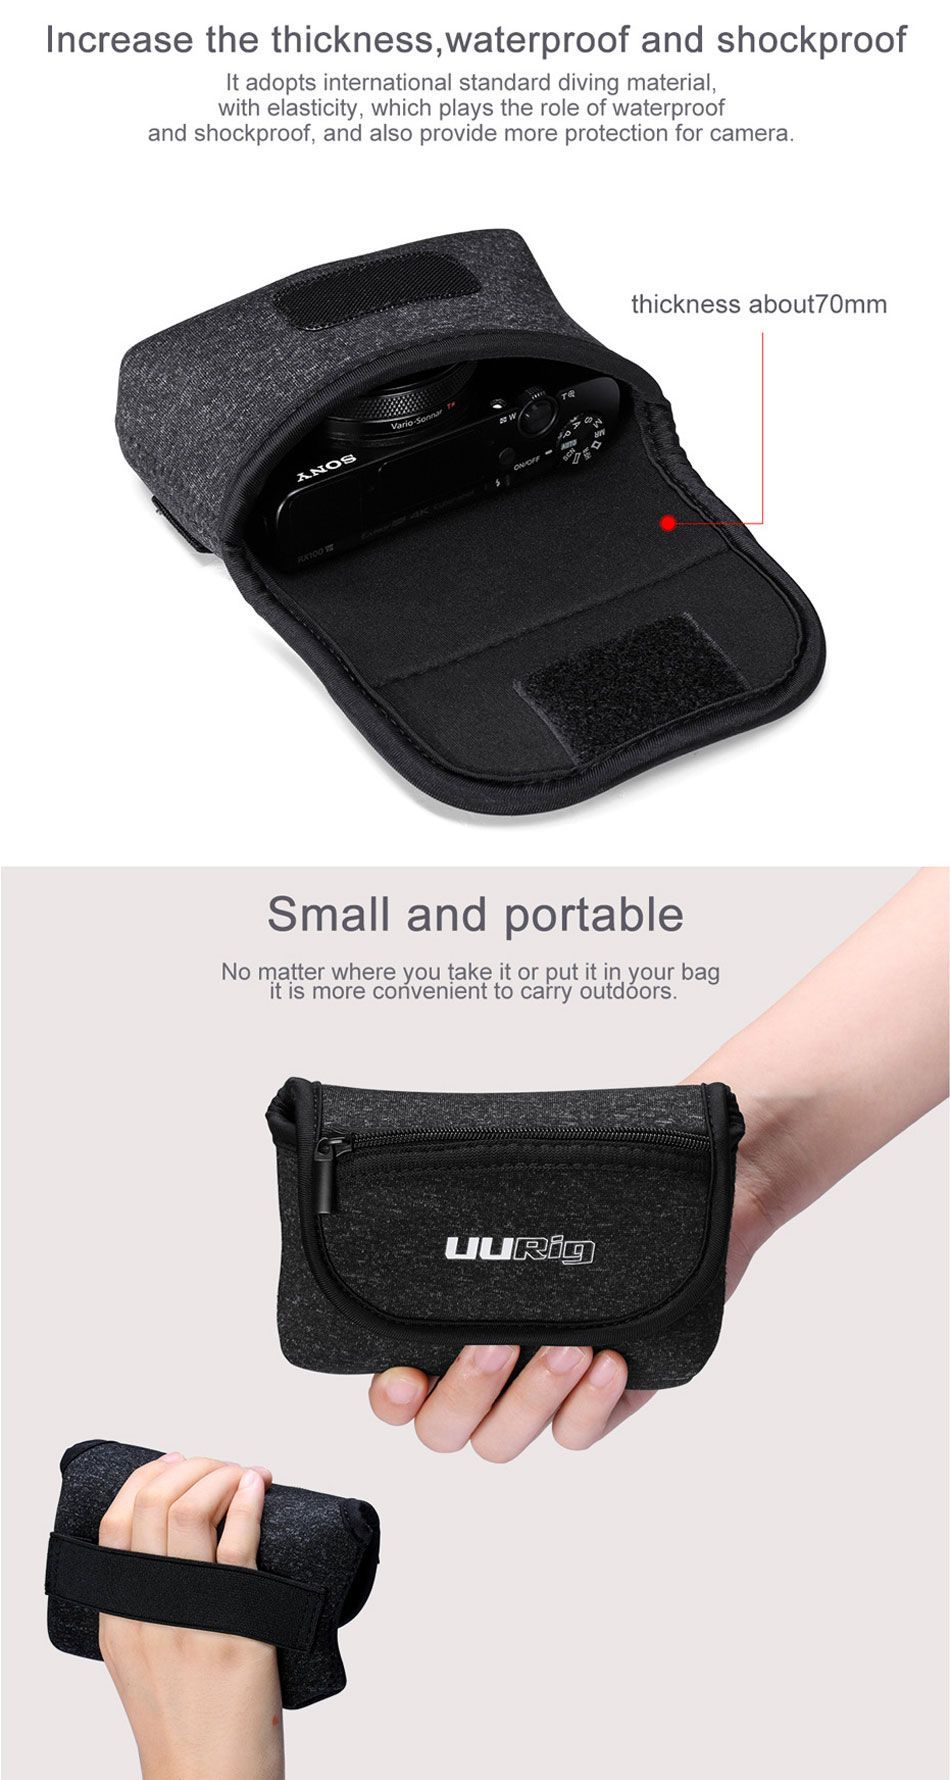 UURig-R014-Protective-Carrying-Travel-Bag-for-Sony-RX100-VII-for-Canon-G7X-Mark-III-PointShoot-Camer-1565567